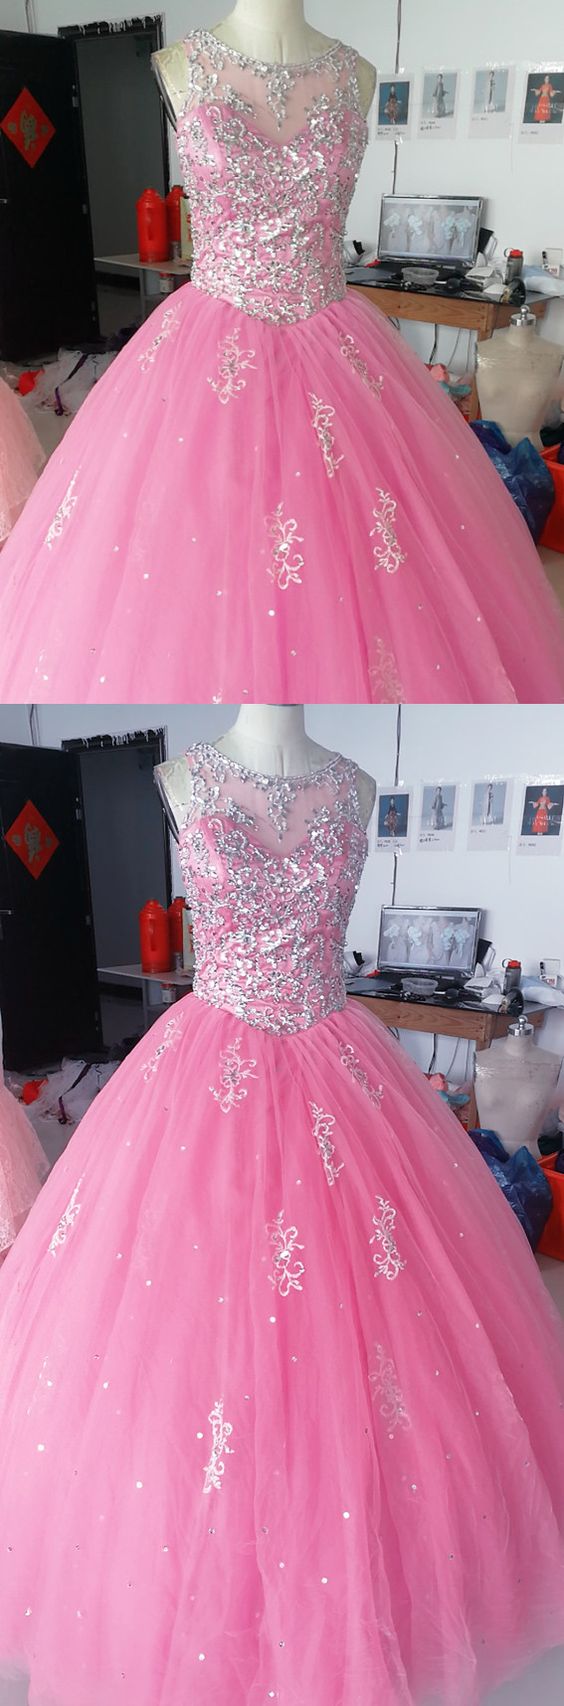 Baby Pink Tulle Ball Gowns Quinceanera Dresses Crystal Beaded M8296